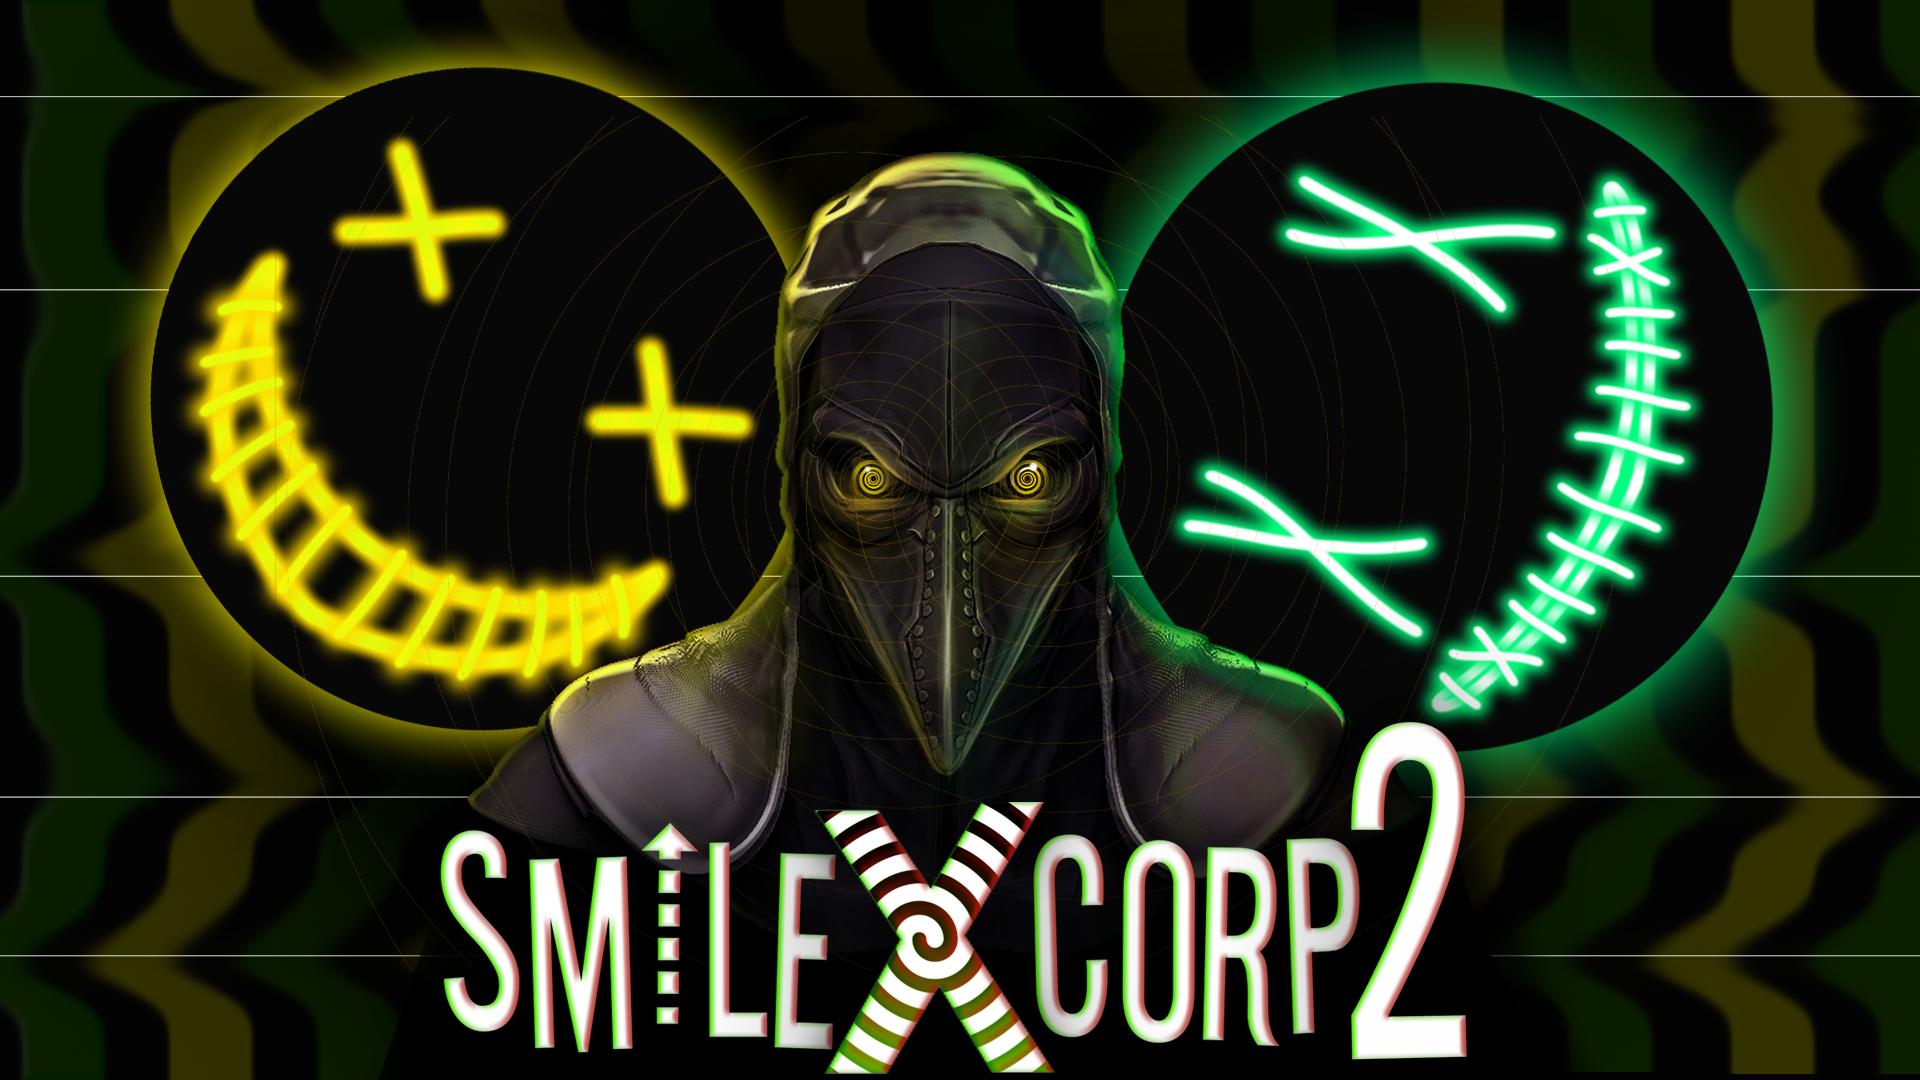 Smiling-X 2: Action and adventure with jump scares